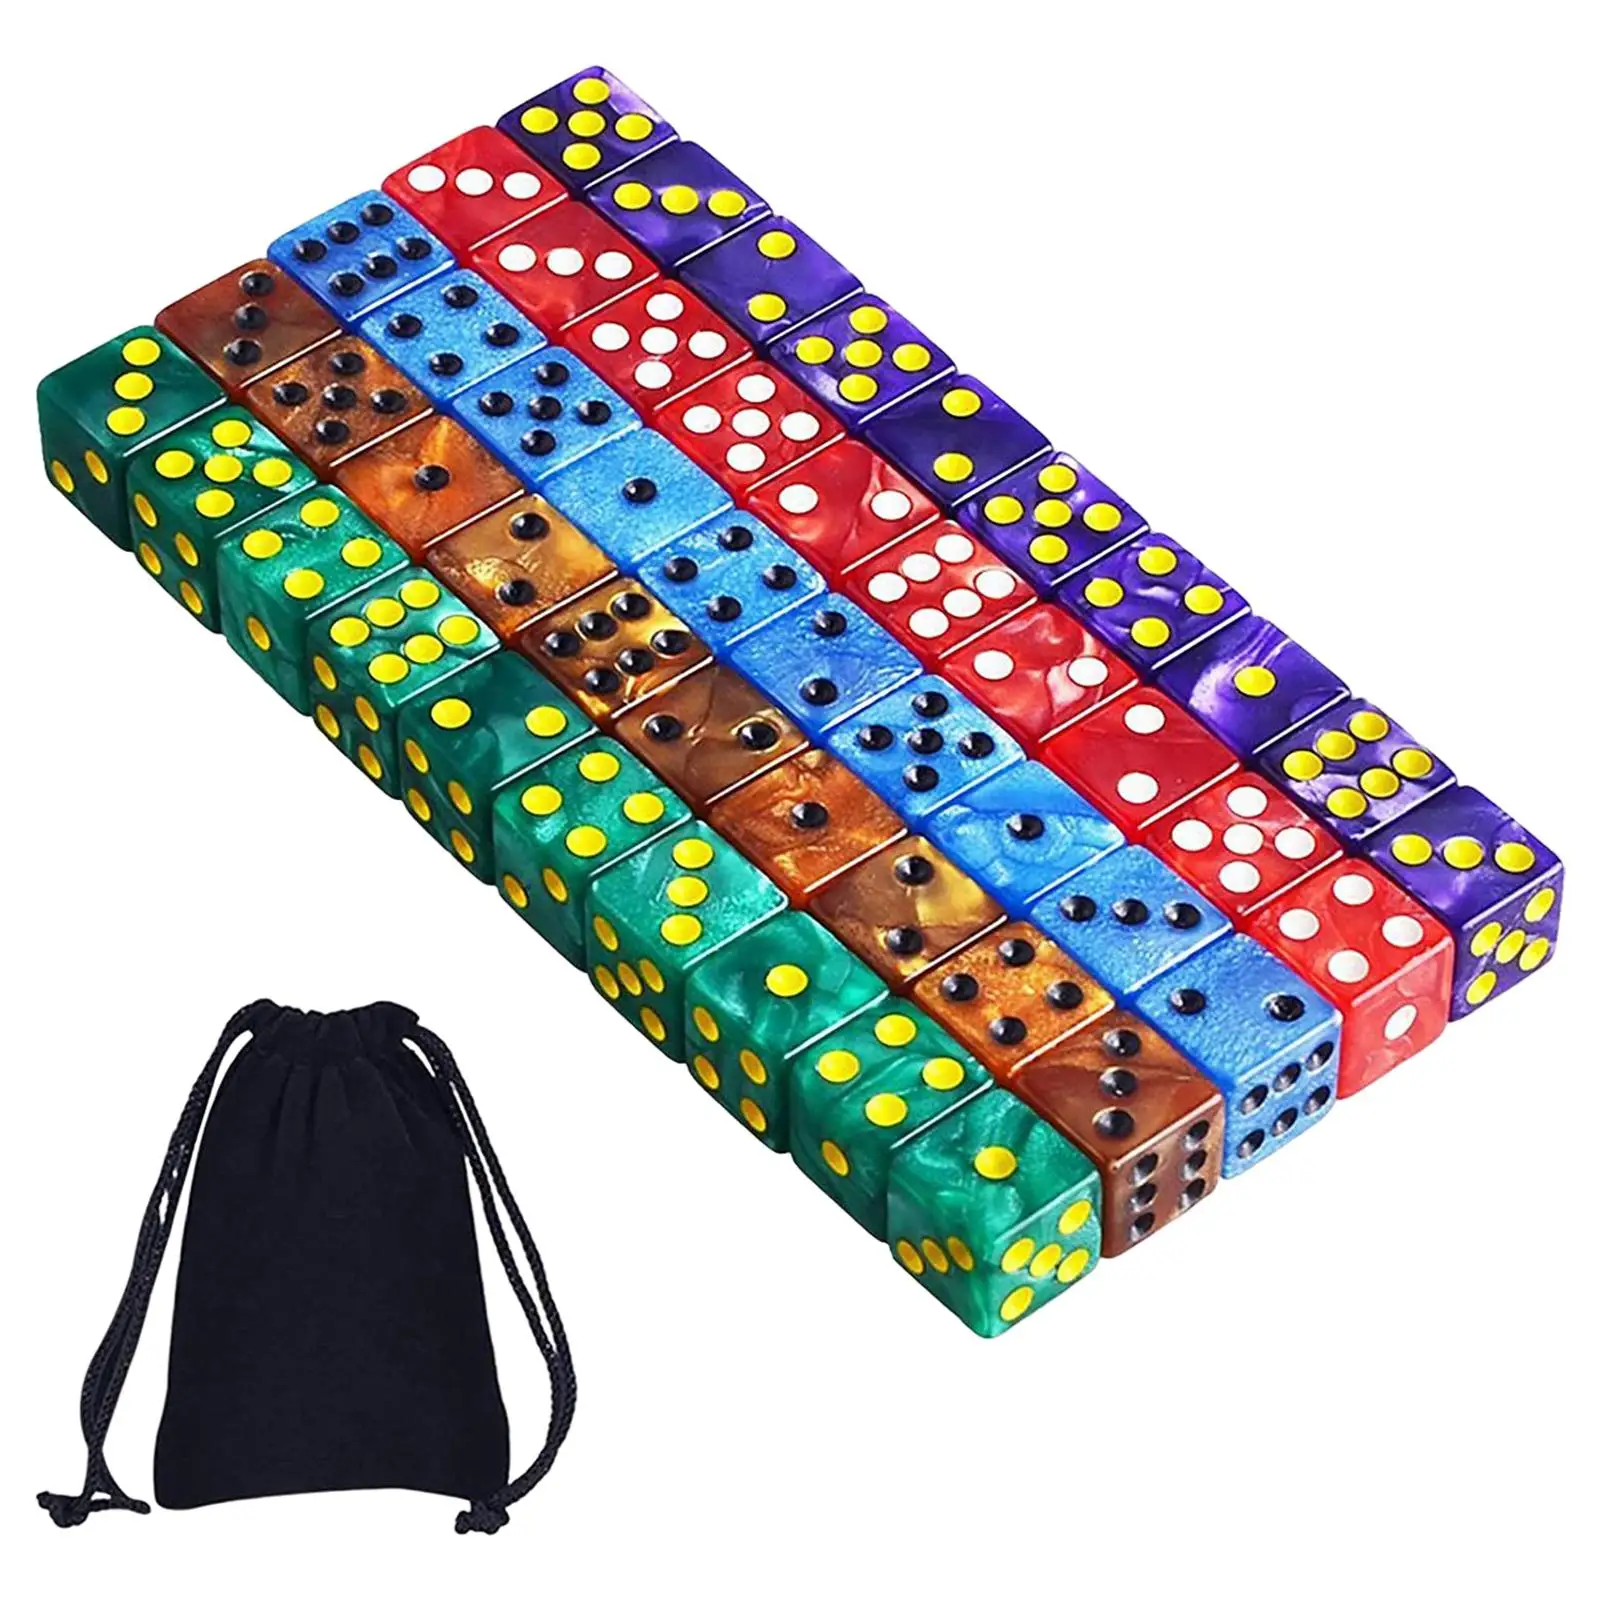 50x 6 Sided Dices Party Game Dices Math Teaching Toy Party Favors Playing Dices Lightwheigt Polyhedral Dices for Table Game